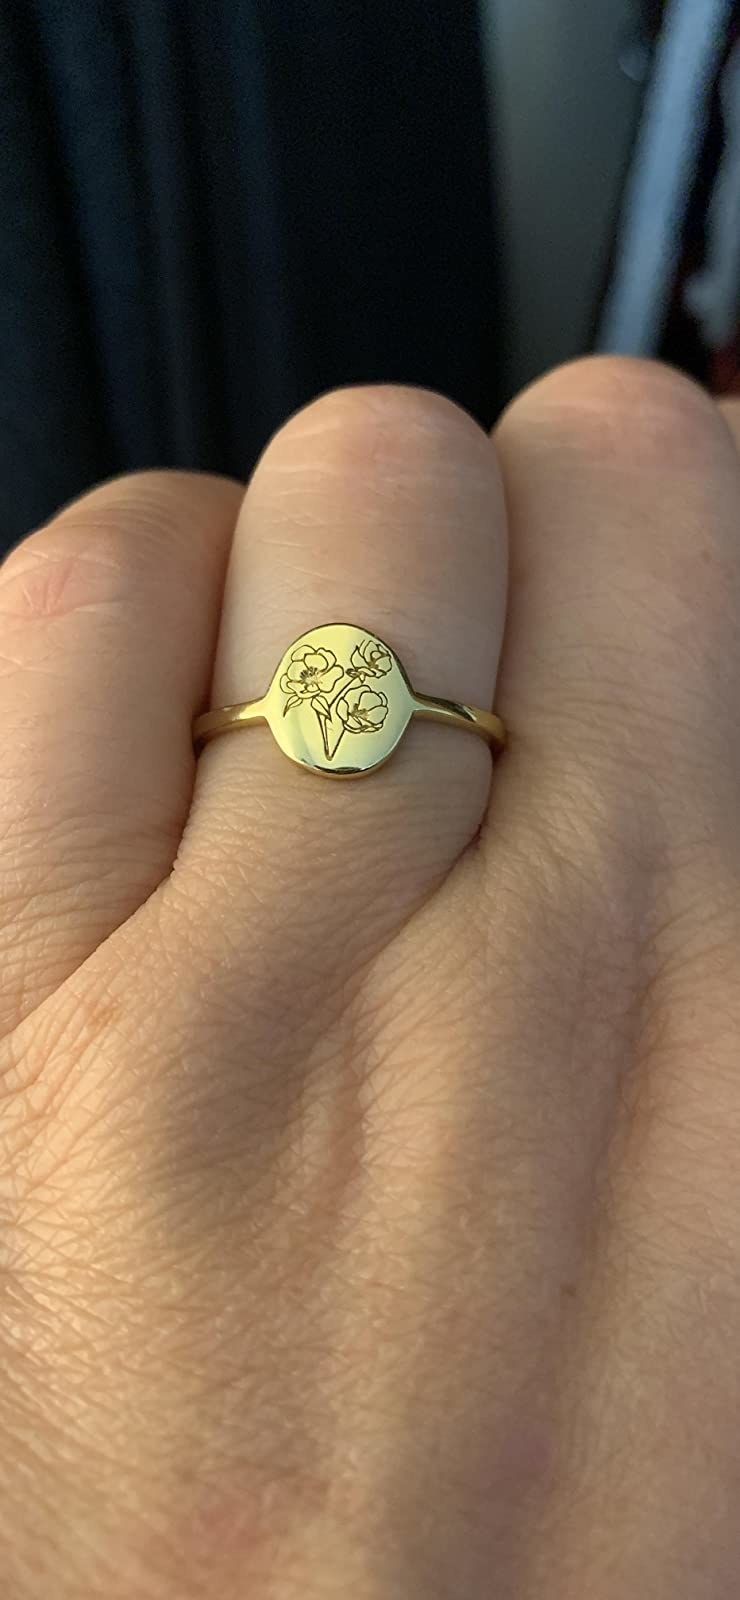 Minimalistic Statement Ring with Botanical Engraved YeGieonr Handmade Flower Signet Ring Delicate Personalized Jewelry Gift for Women/Girls 